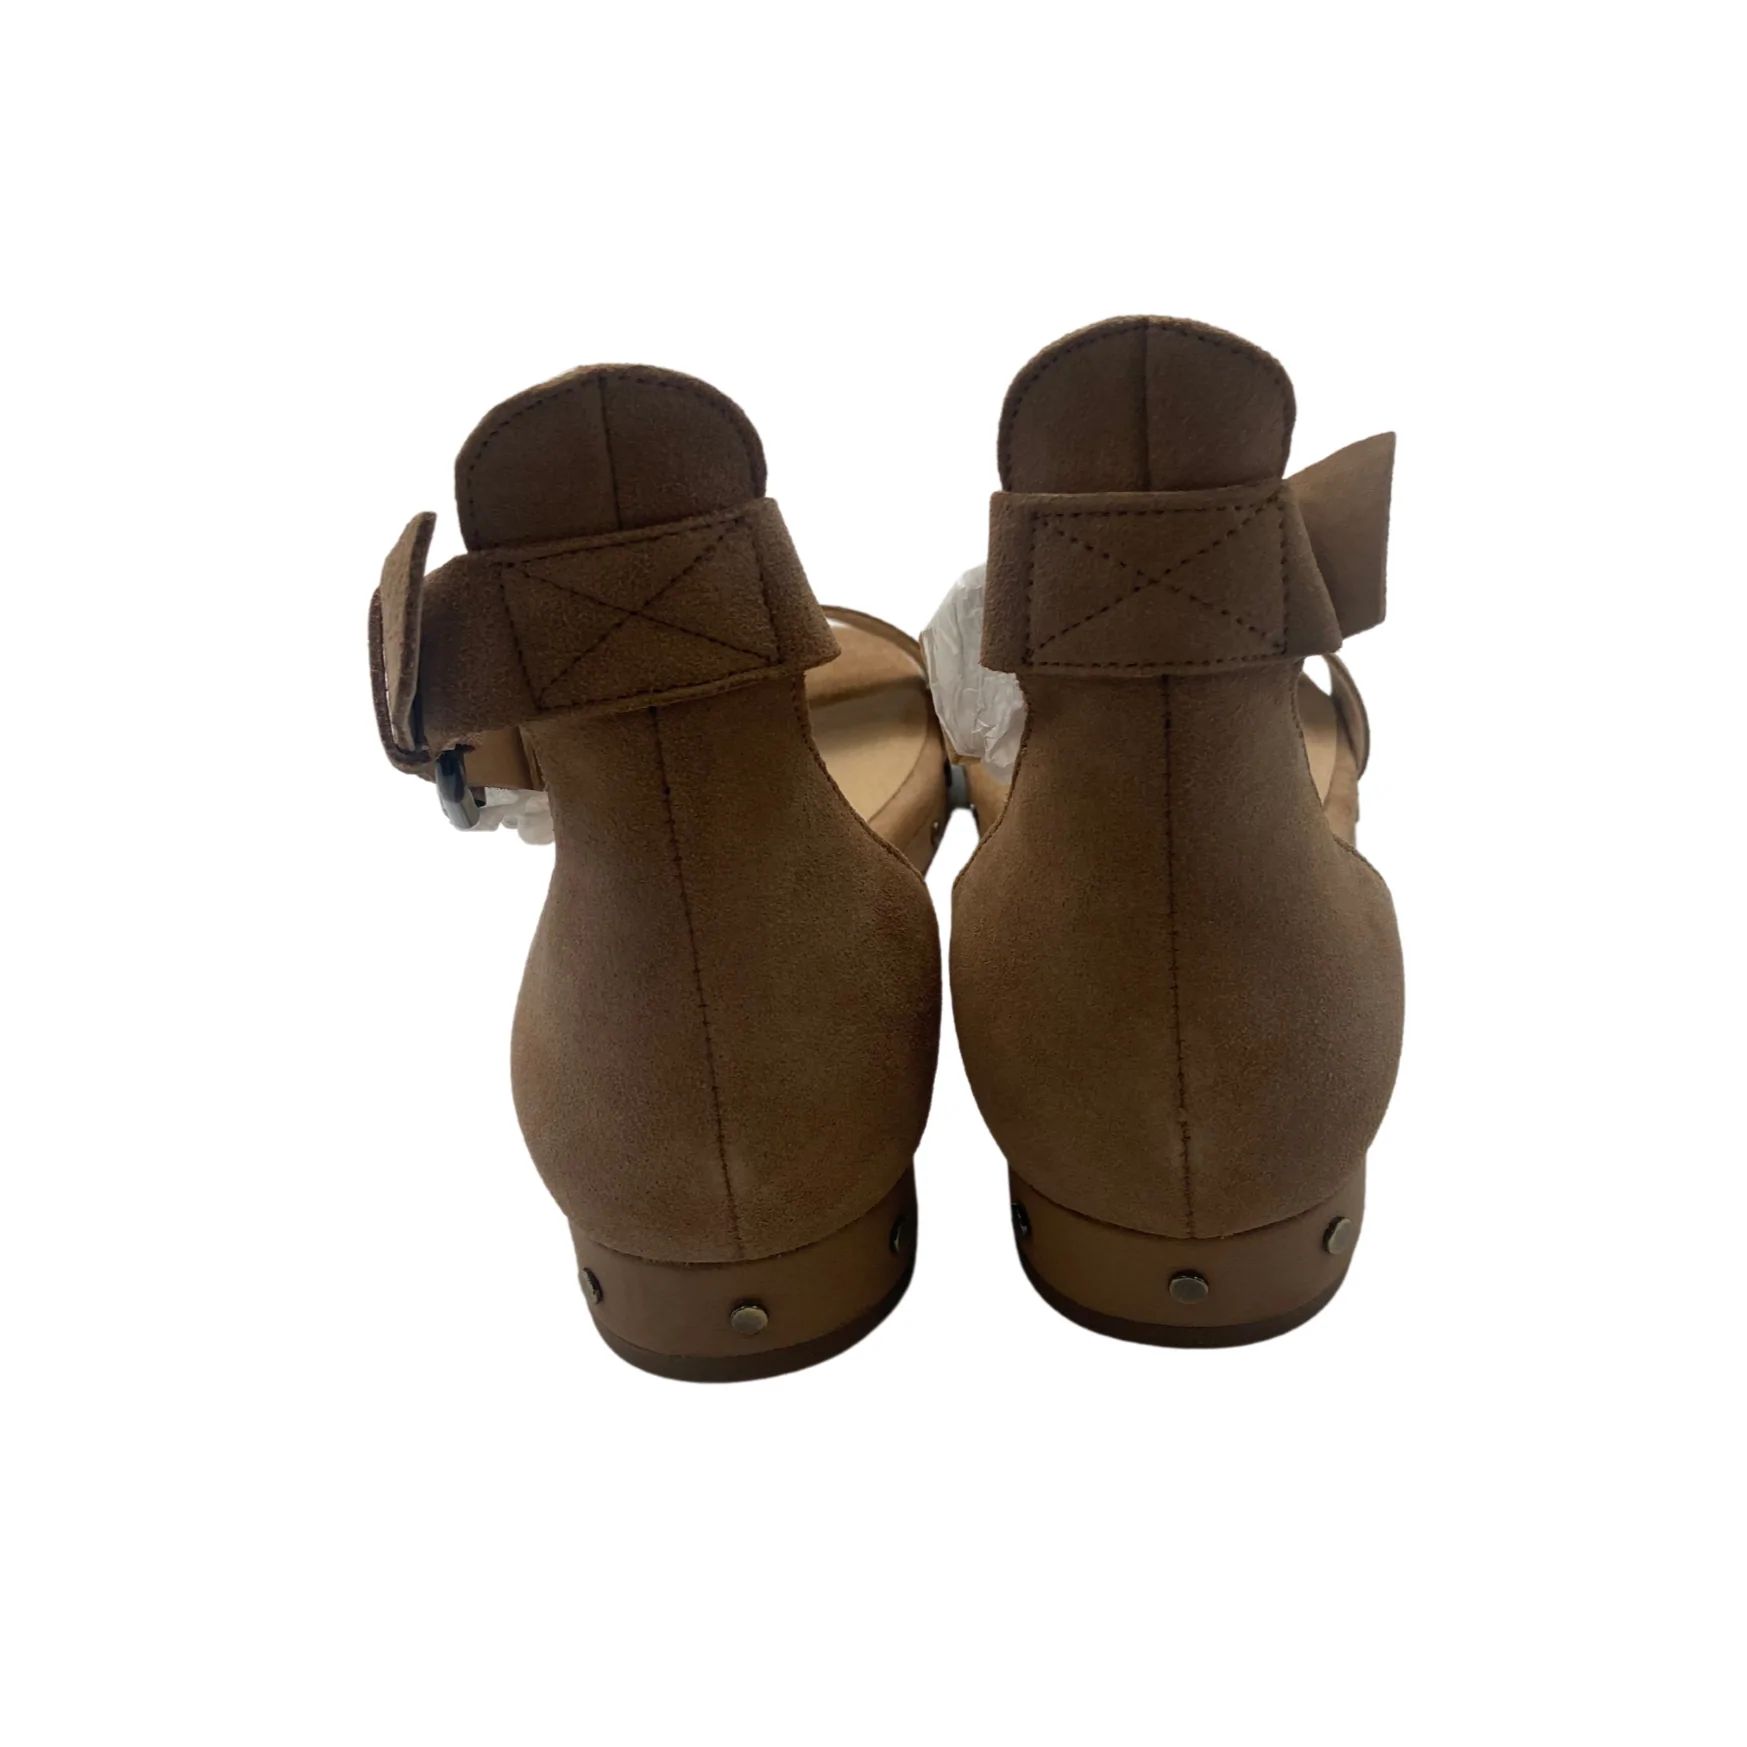 Chinese Laundry: Women's Sandals / Suede / Camel / Open Toe / Grady / Size 10